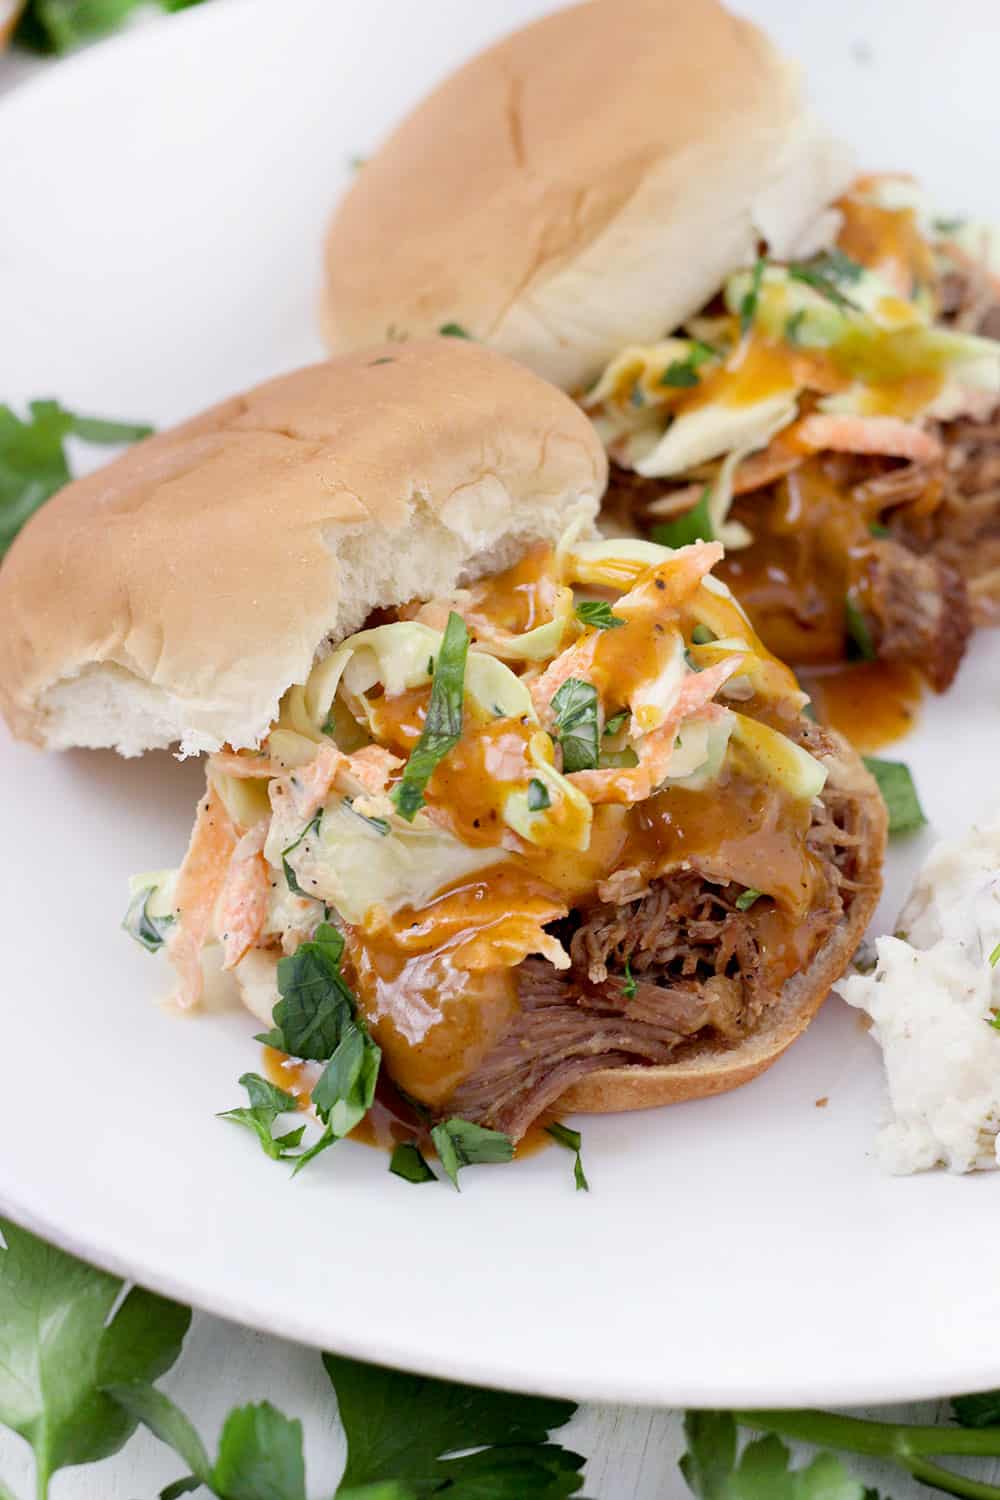 This Instant Pot Pulled Pork is a quick and easy recipe to feed a crowd! I love it served on slider buns with coleslaw or on tortillas with cilantro and onion. It's inexpensive, and the leftovers freeze beautifully.